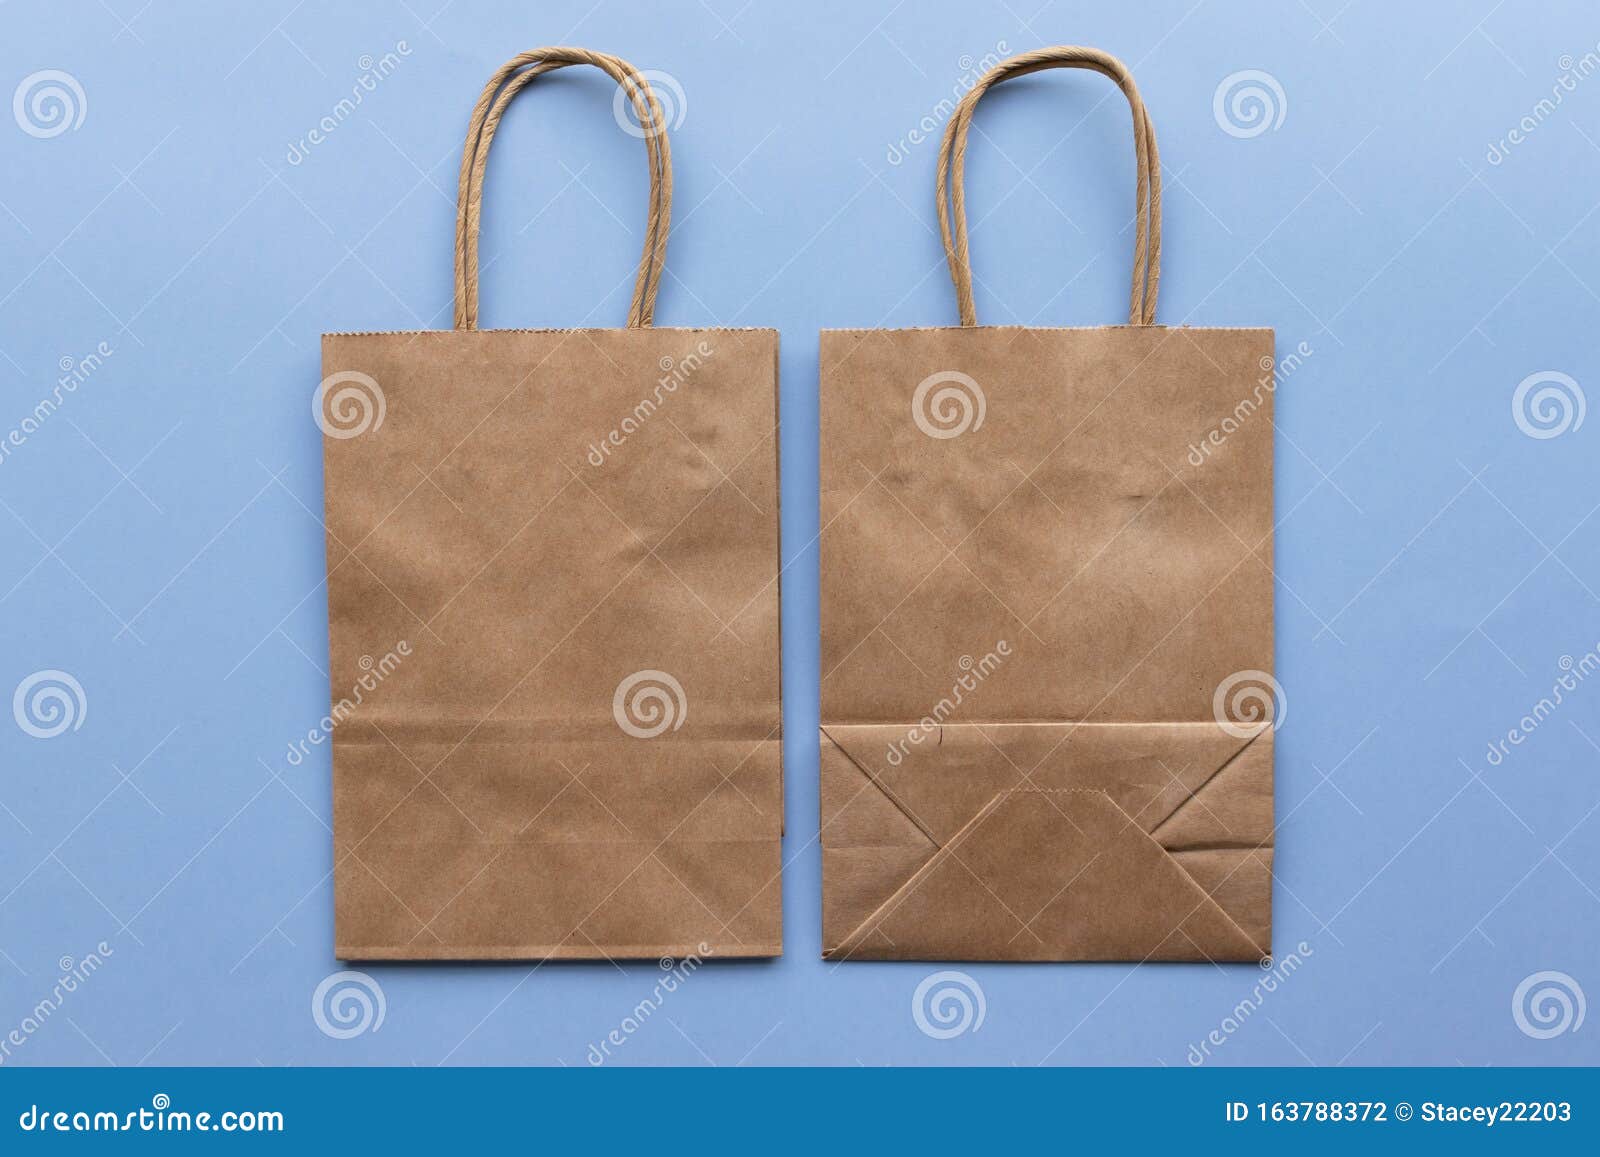 Download Plain Blank Brown Paper Bag Front And Back On A Blue ...